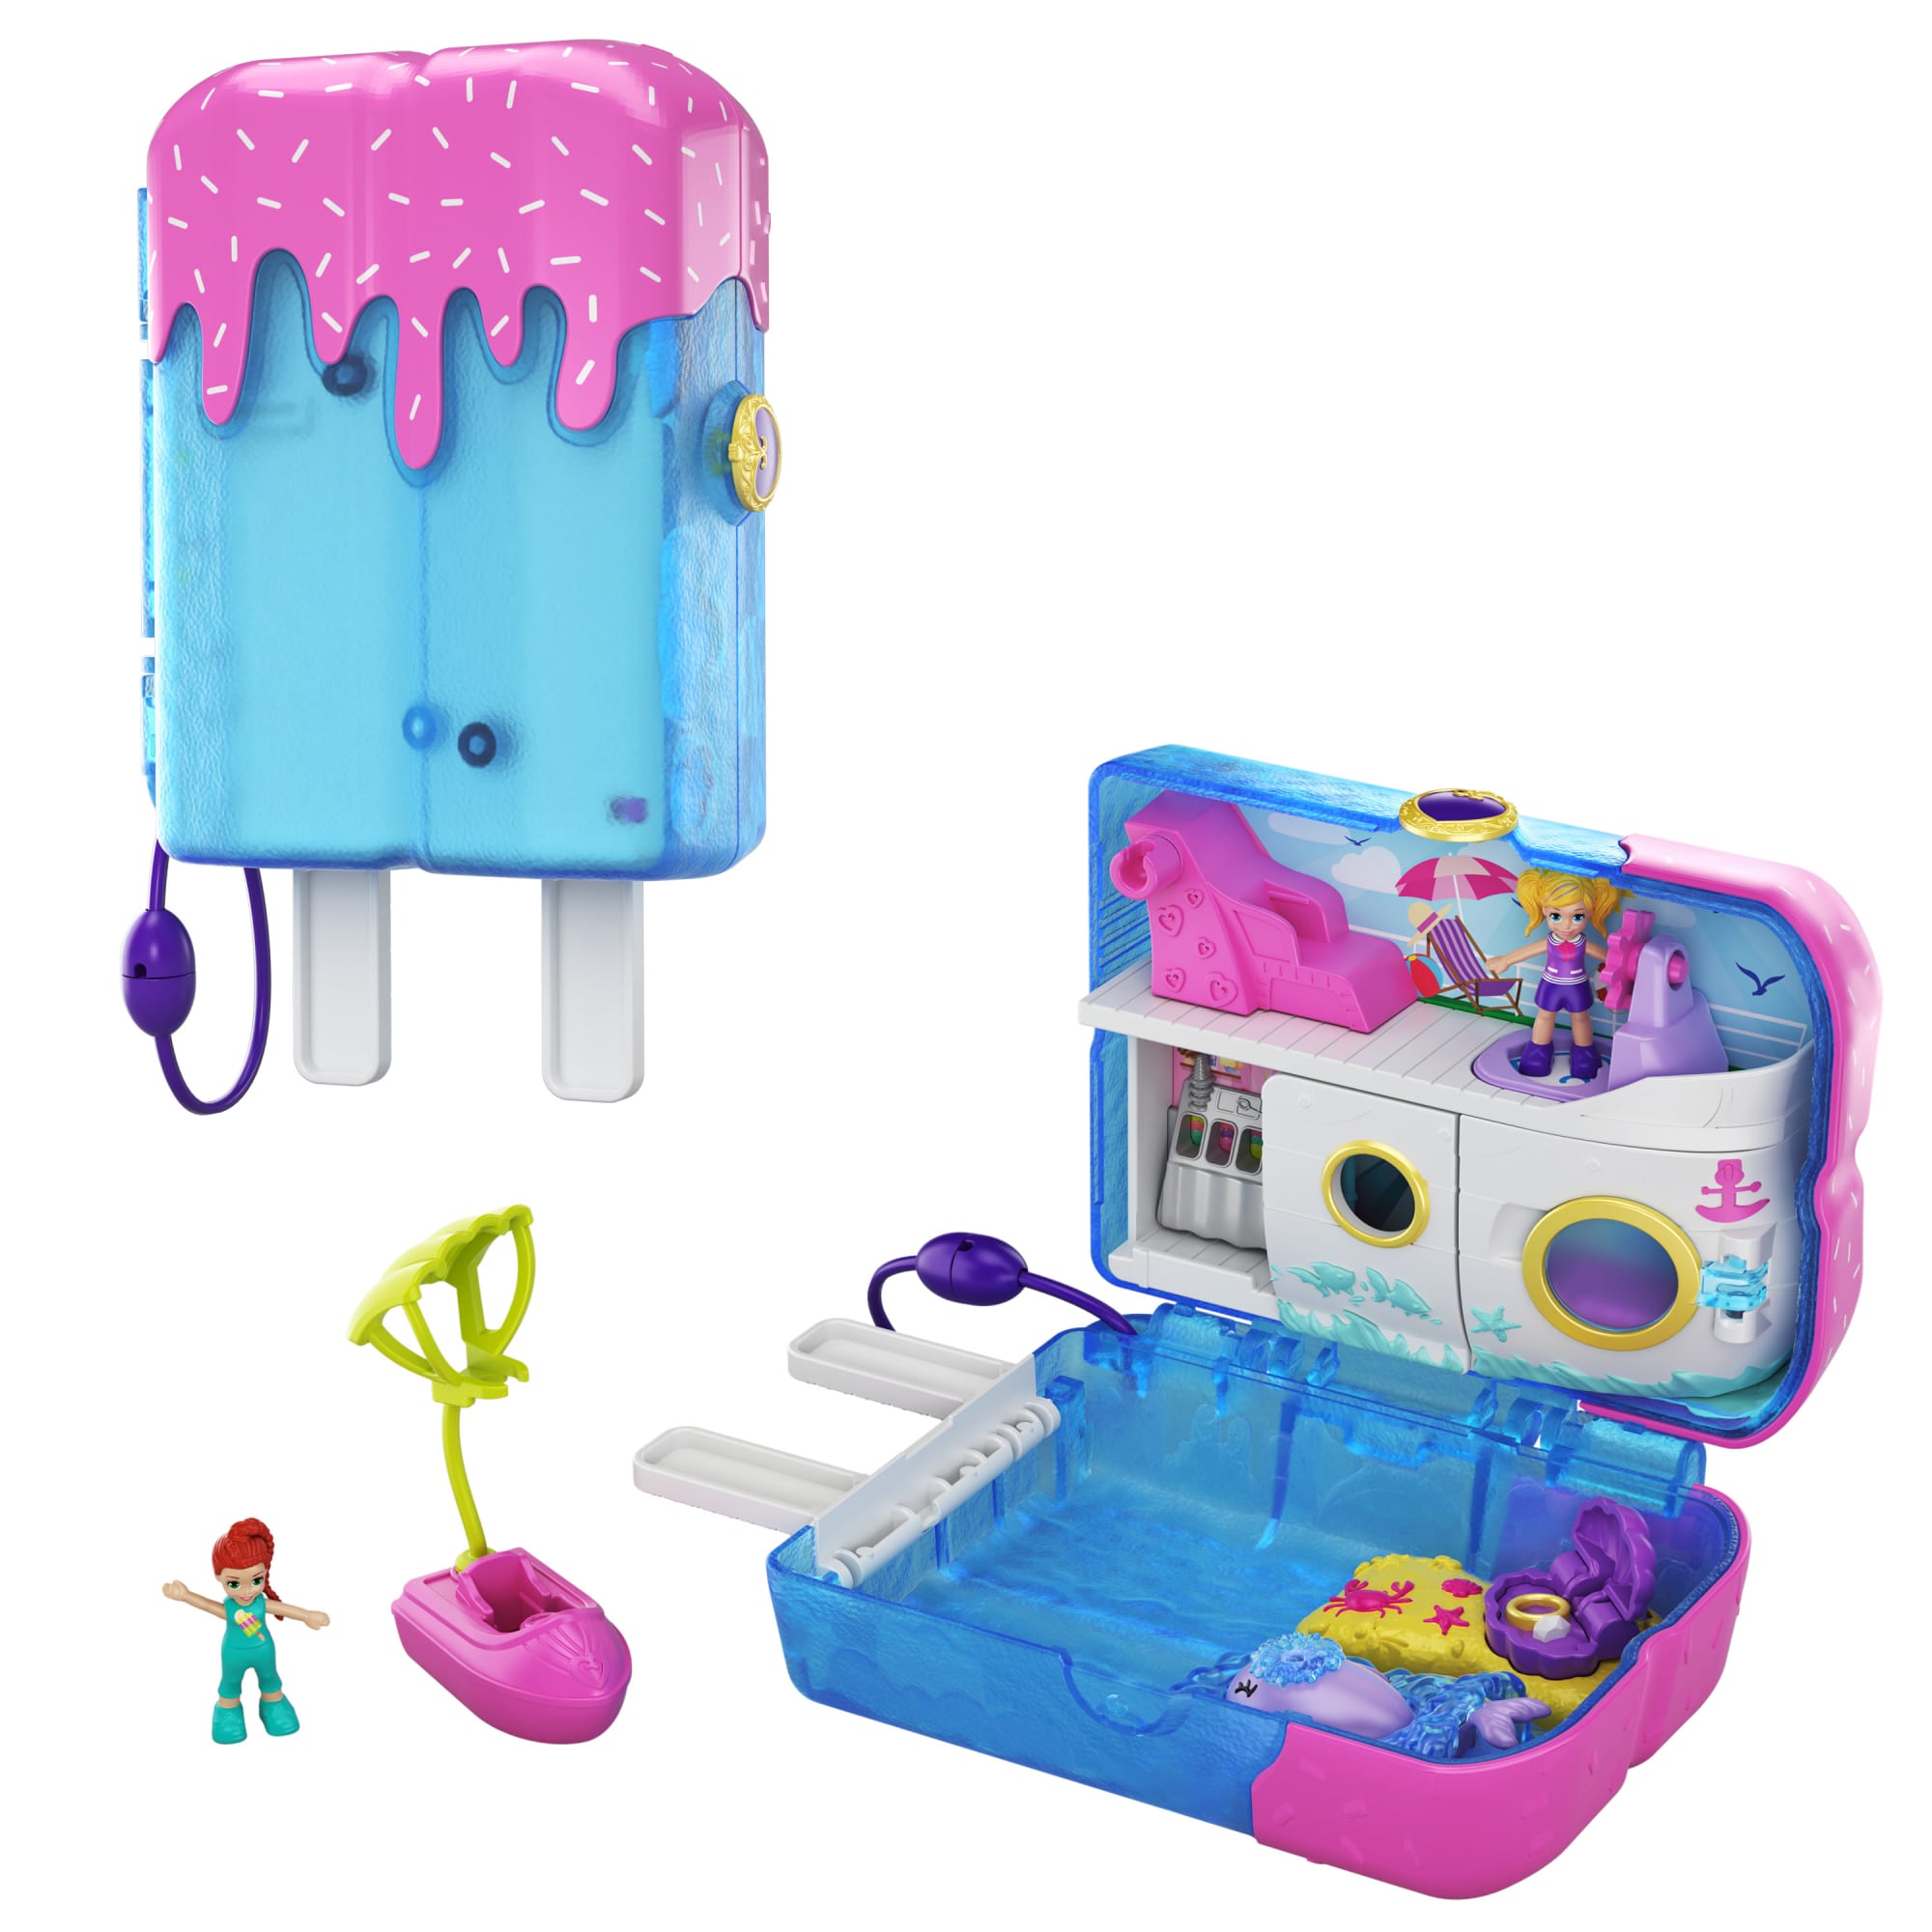  Polly Pocket 2-In-1 Travel Toy Playset, Spin 'N